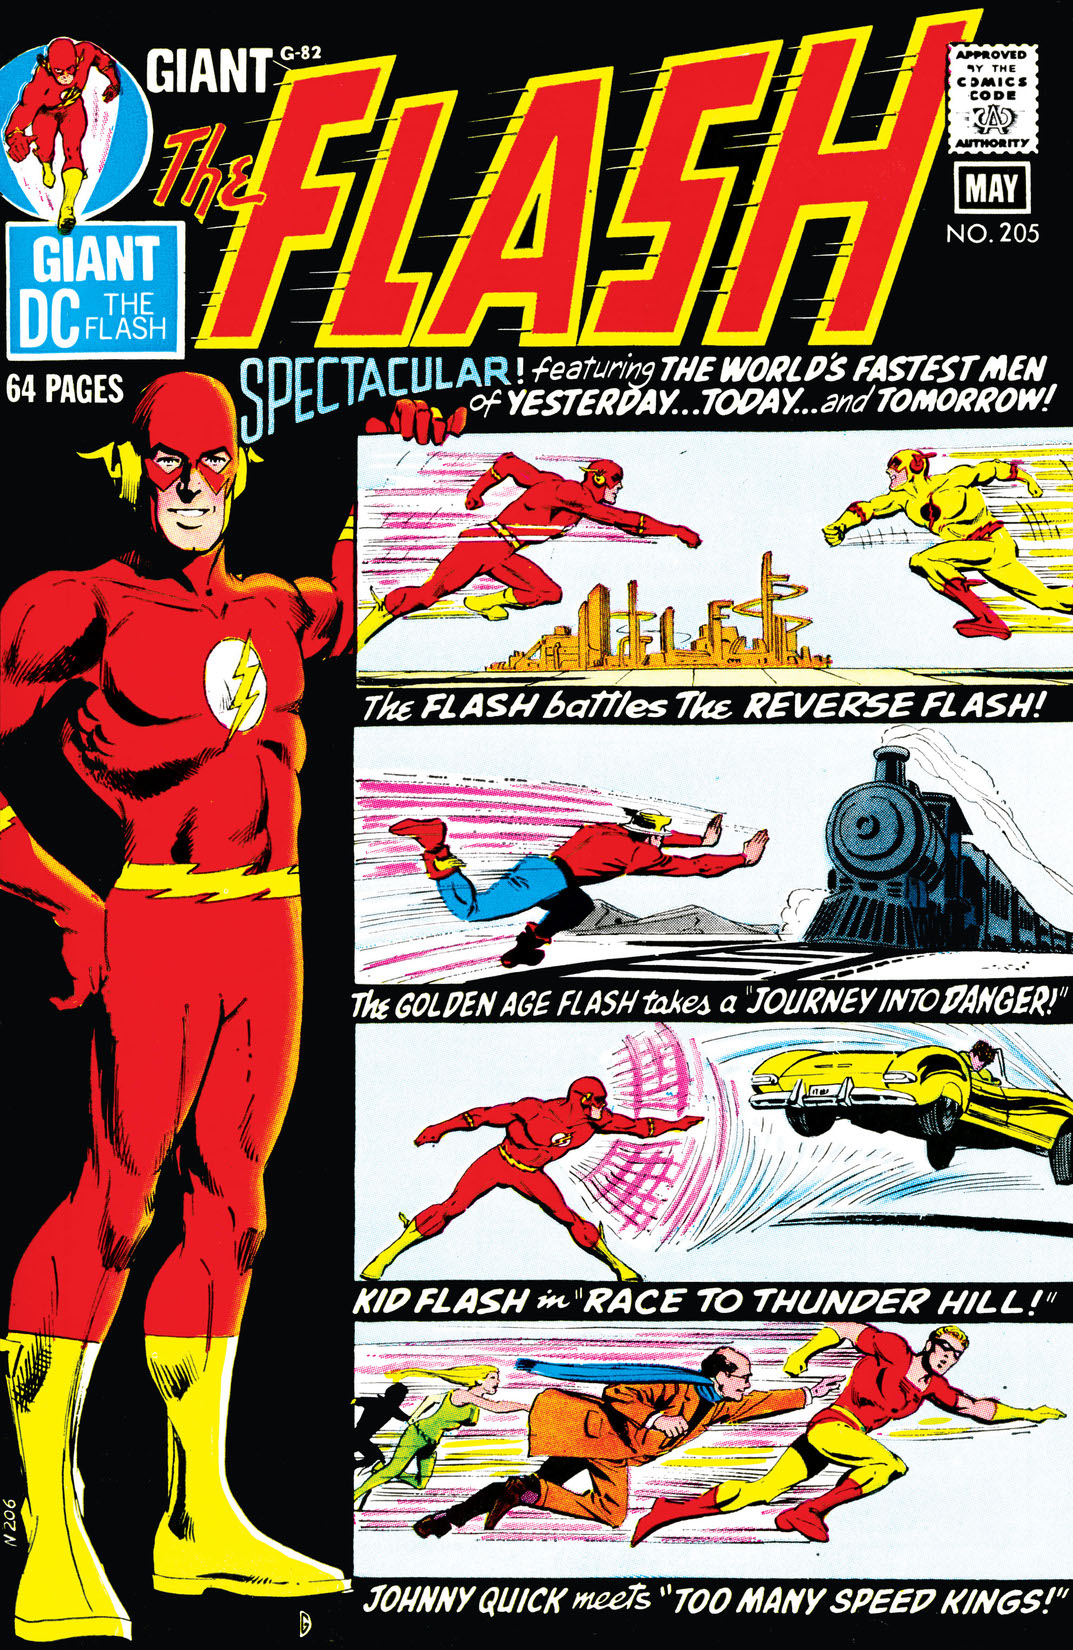 The Flash (1959-) #205 preview images